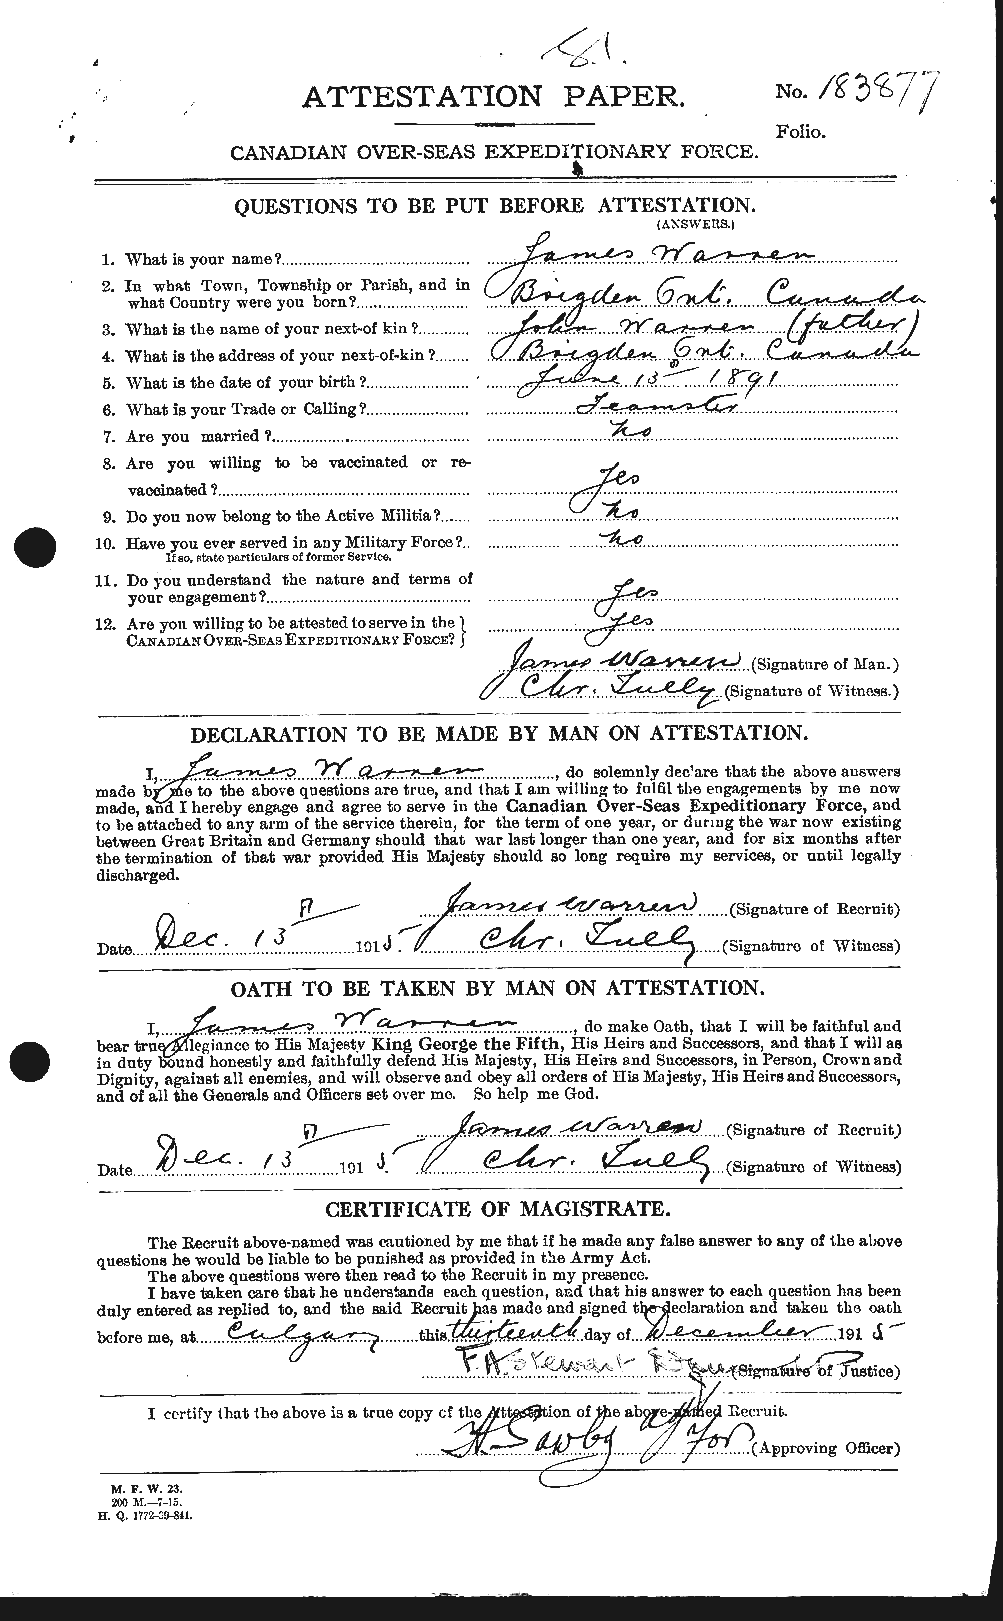 Personnel Records of the First World War - CEF 658522a